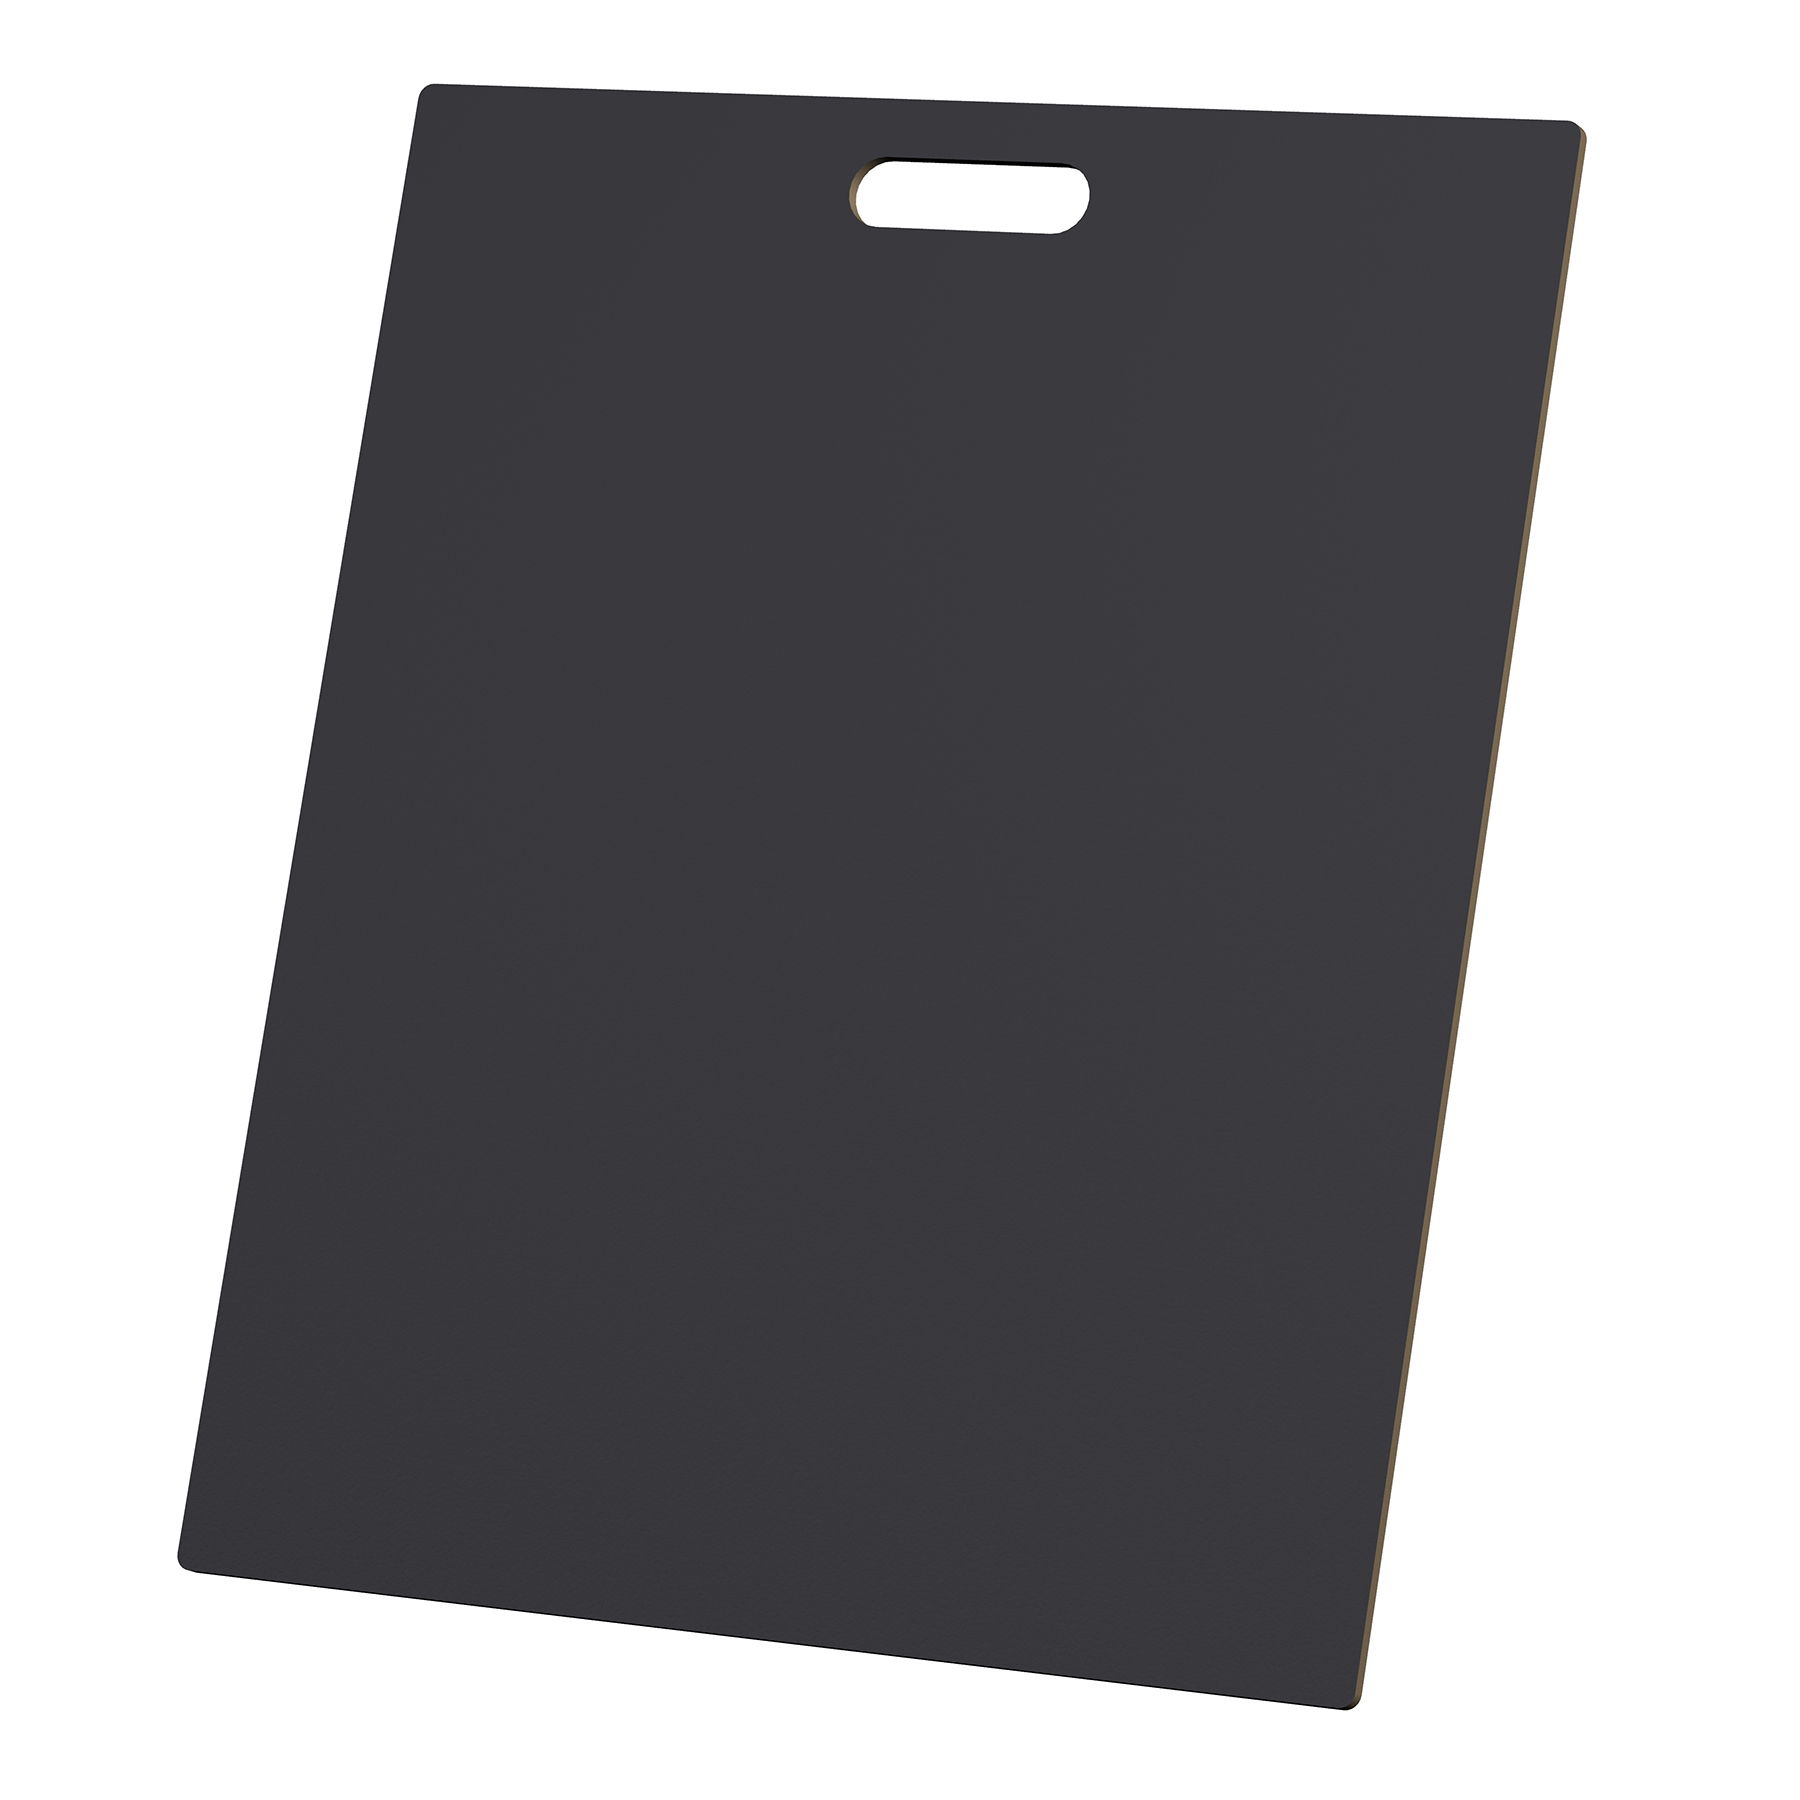 18 inch x 24 inch Black Sample Display Board for Tile Flooring Stone Wood